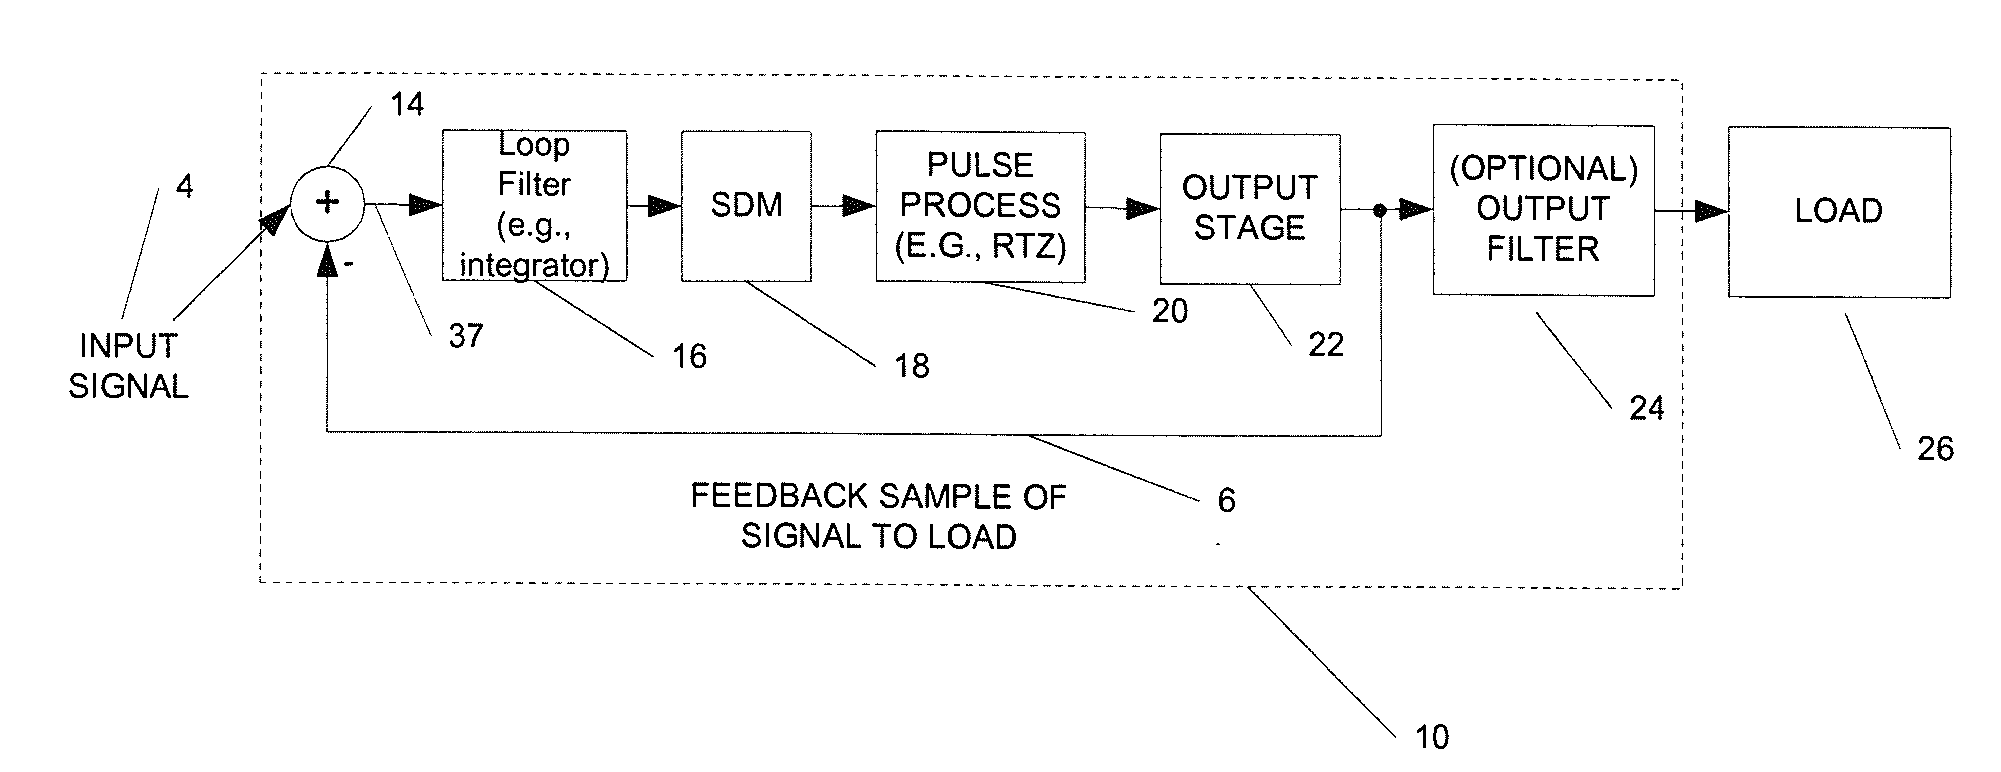 Sigma-delta based class d audio or servo amplifier with load noise shaping